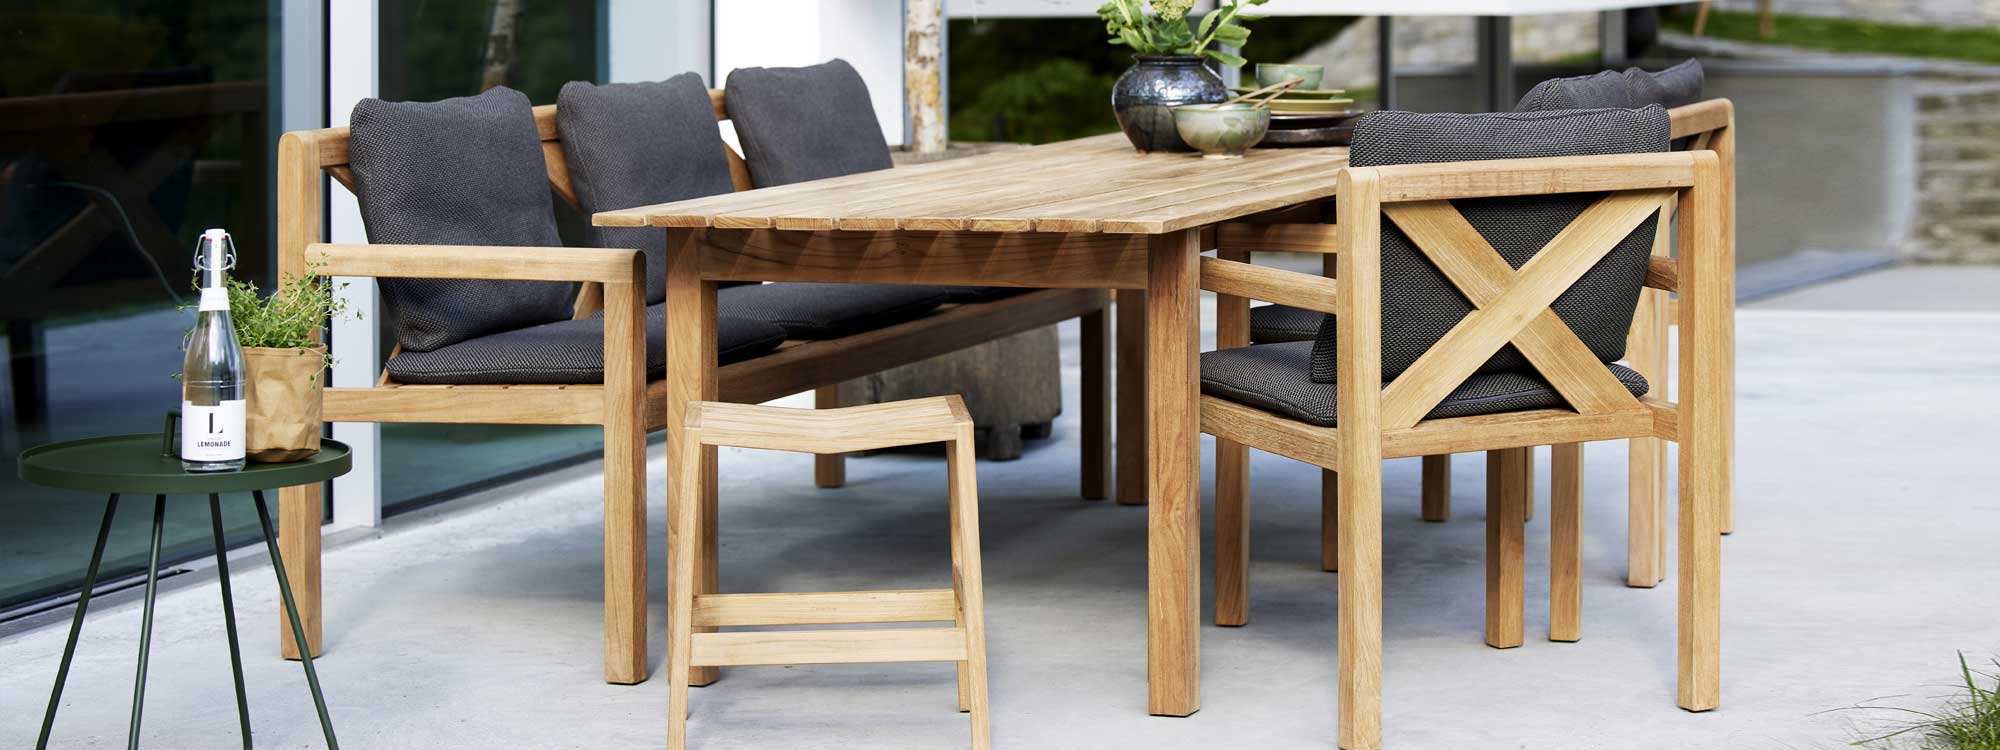 Image of Flip teak stool and Grace teak dining set with grey cushions by Cane-line garden furniture